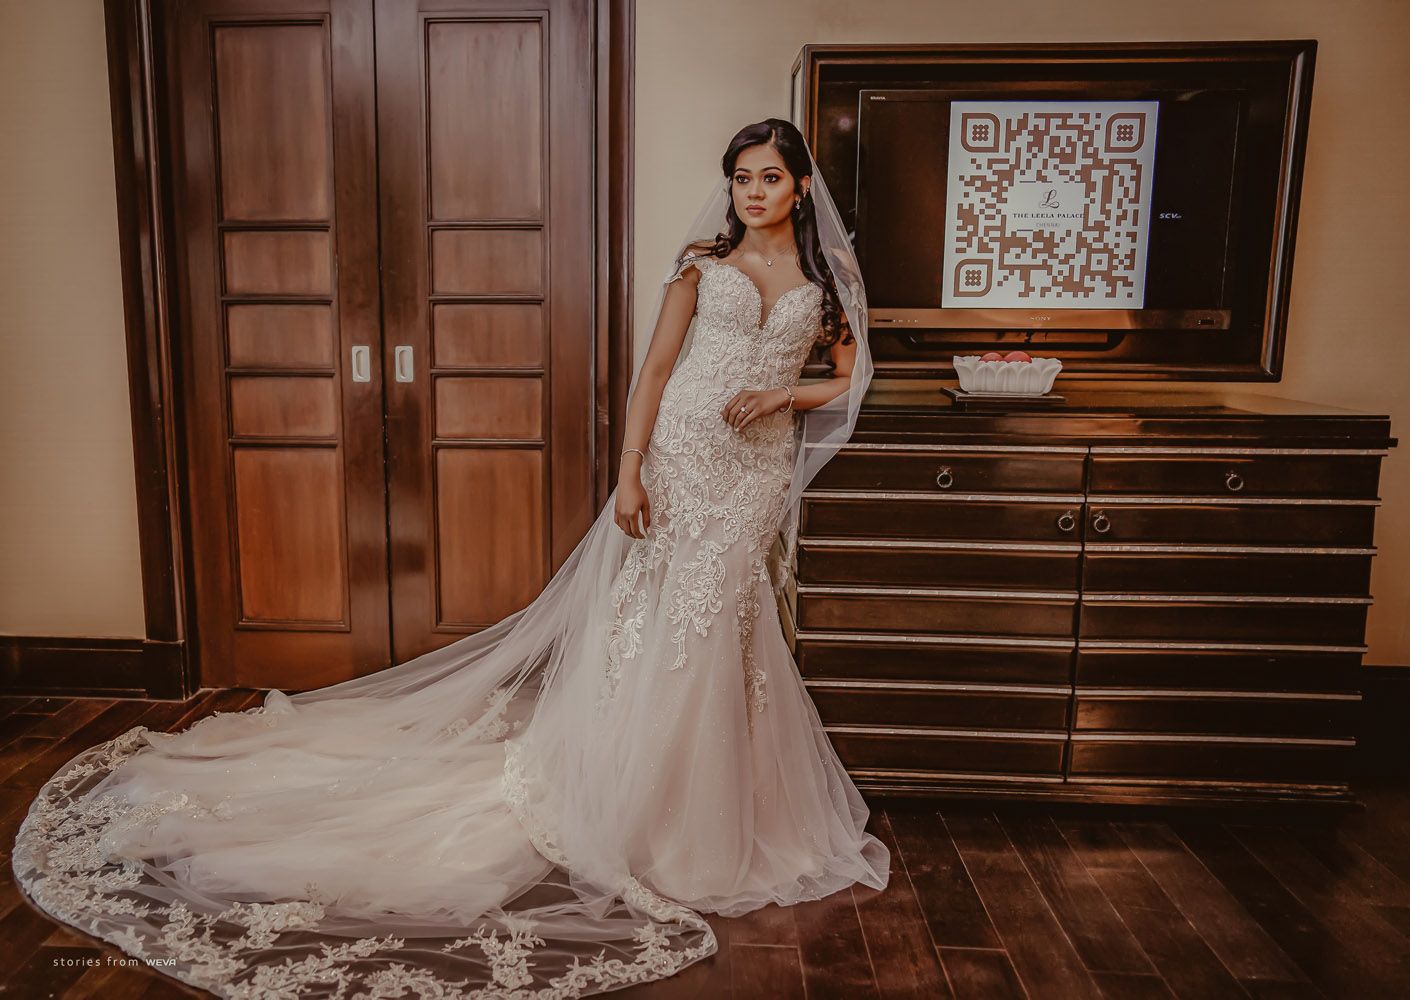 Enchanting Bride in Decorated Room